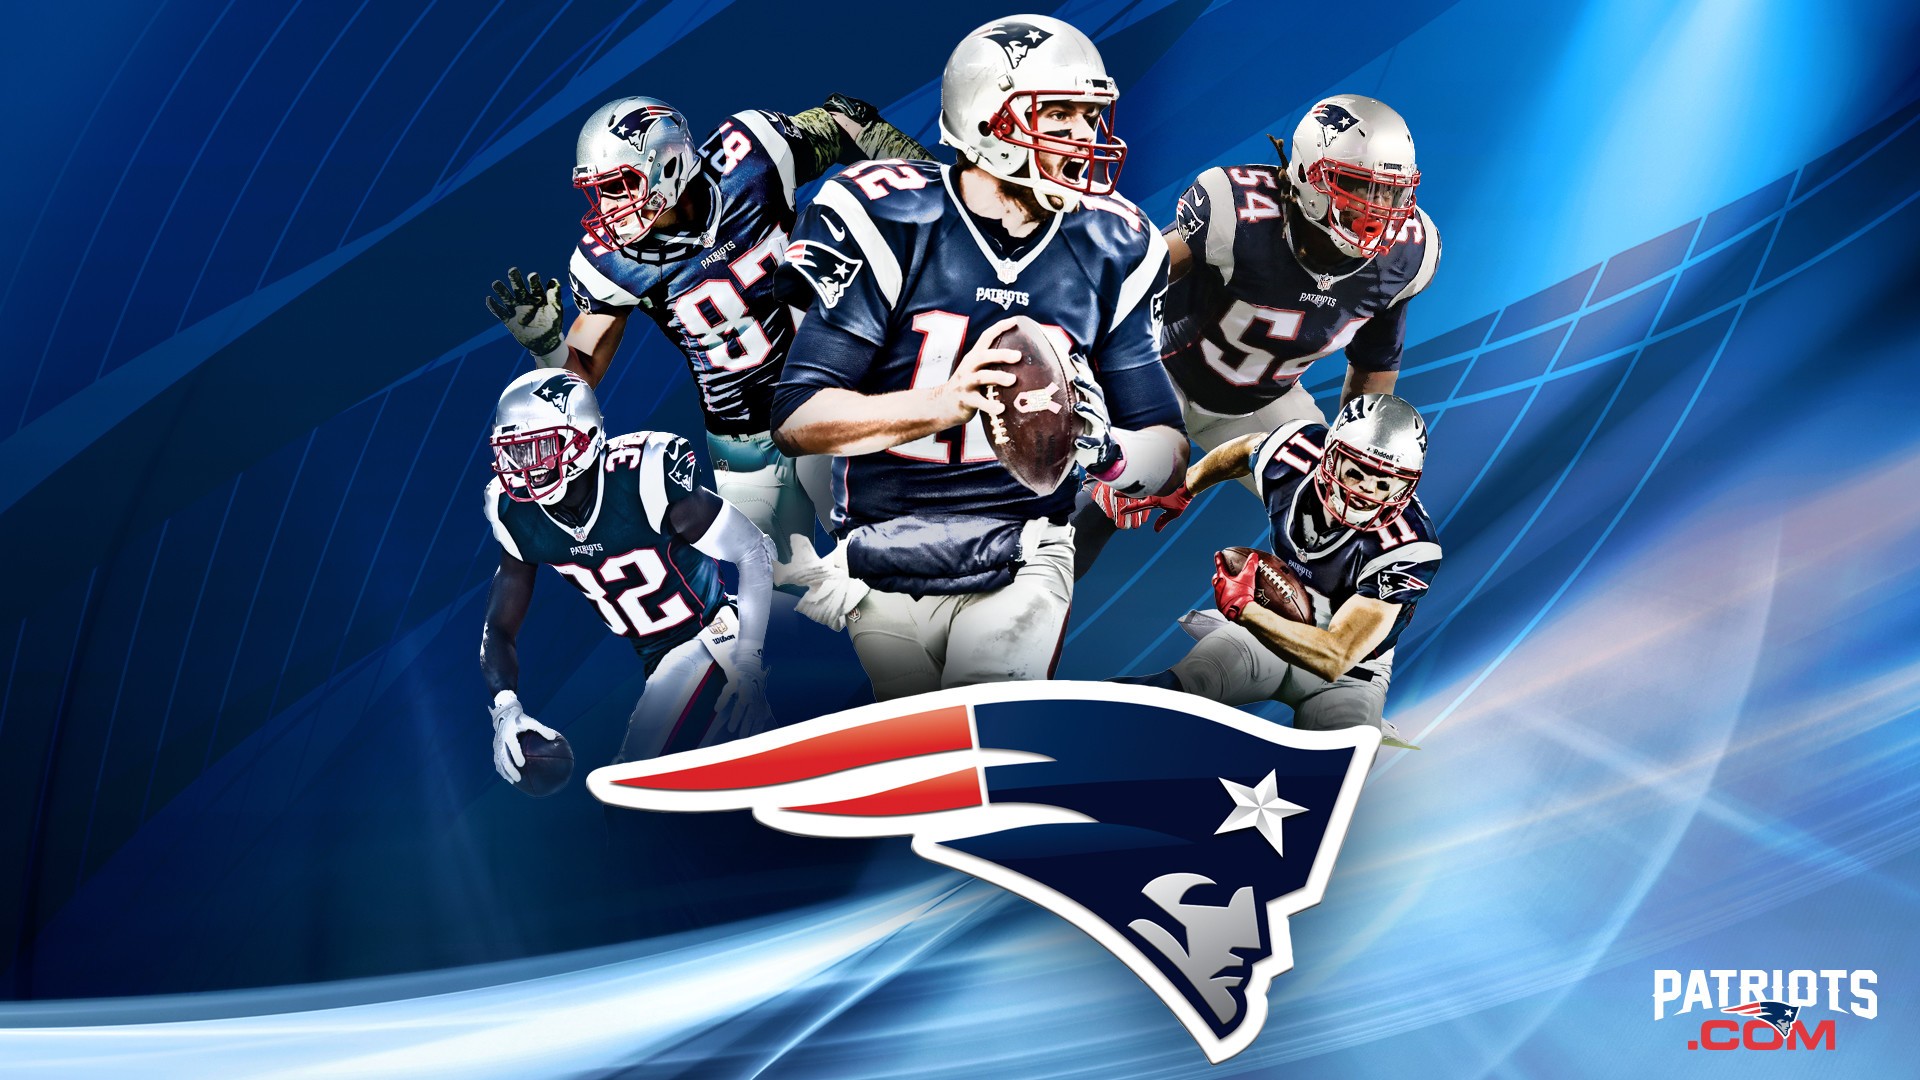 New England Patriots NFL Desktop Backgrounds With high-resolution 1920X1080 pixel. Download and set as wallpaper for Desktop Computer, Apple iPhone X, XS Max, XR, 8, 7, 6, SE, iPad, Android